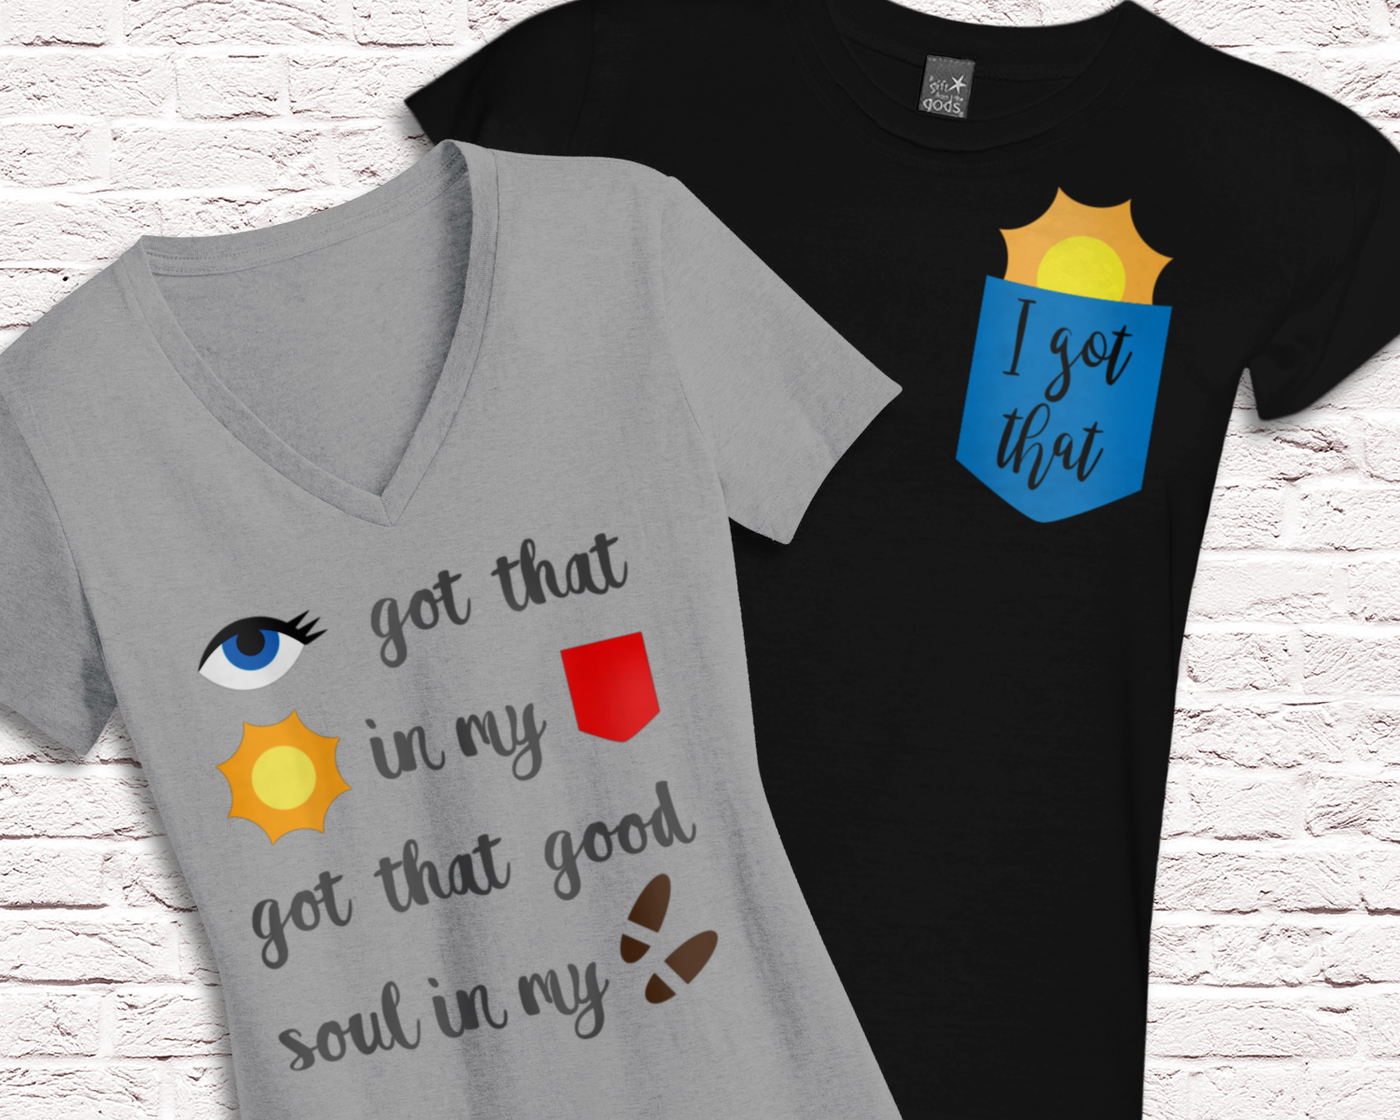 Duo of designs with a pocket that says "I got that" with a sun peeking out from inside, and a rebus of the phrase "[eye] got that [sunshine] in my pocket got that good soul in my [feet]"